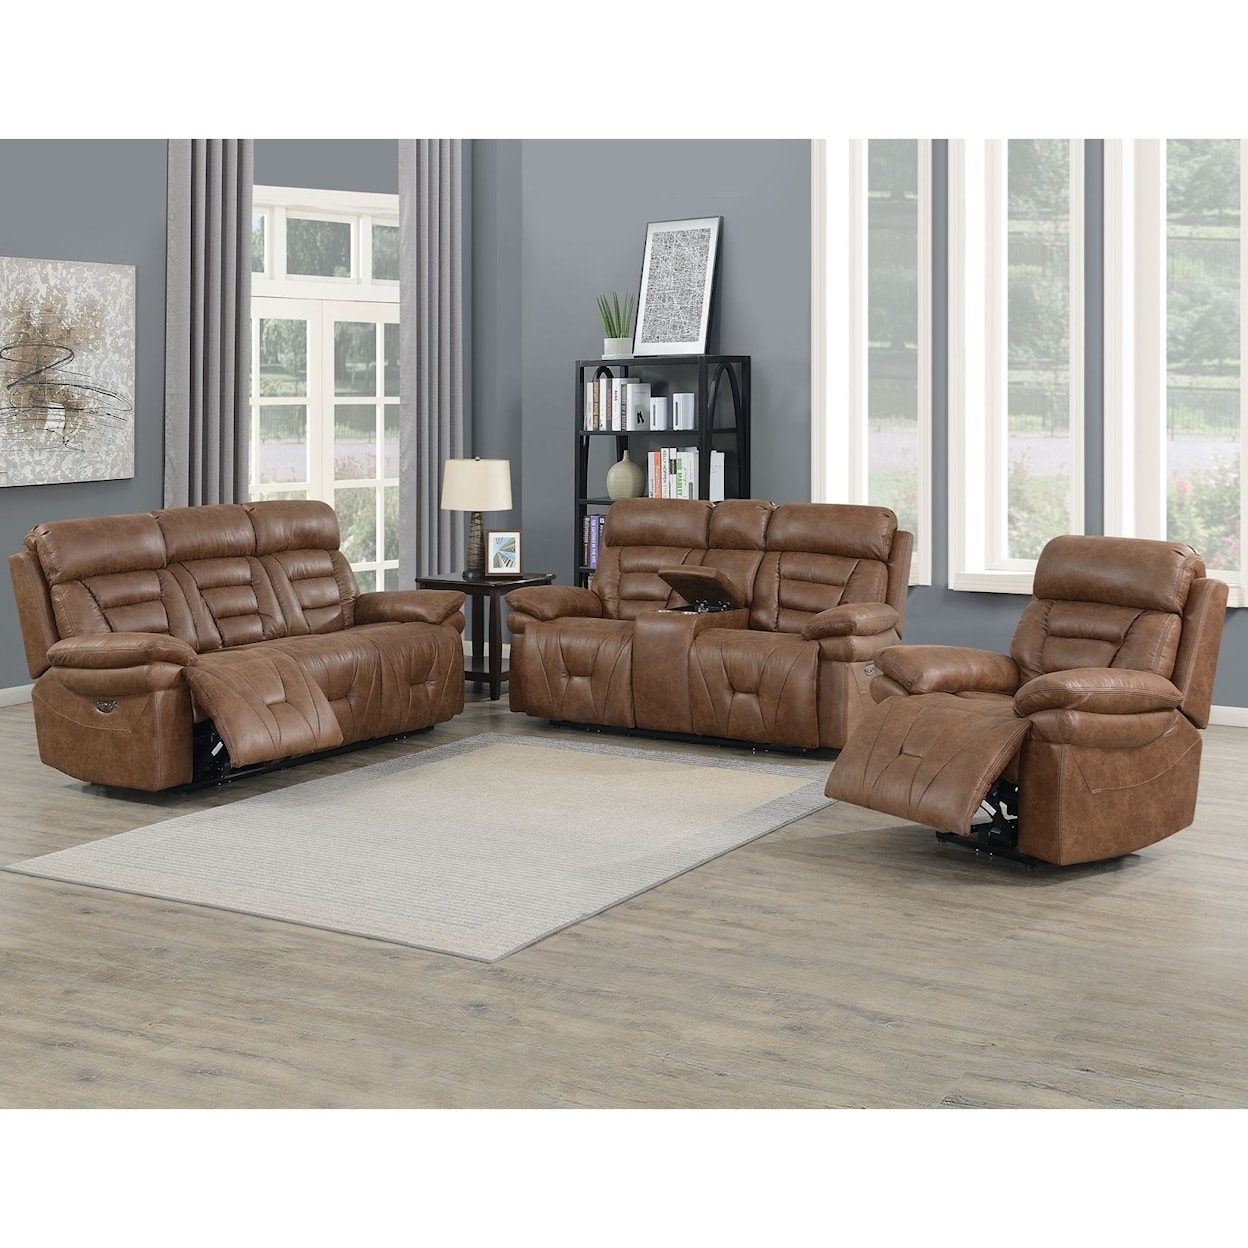 Prime Brock Lay Flat Power Reclining Living Room Group